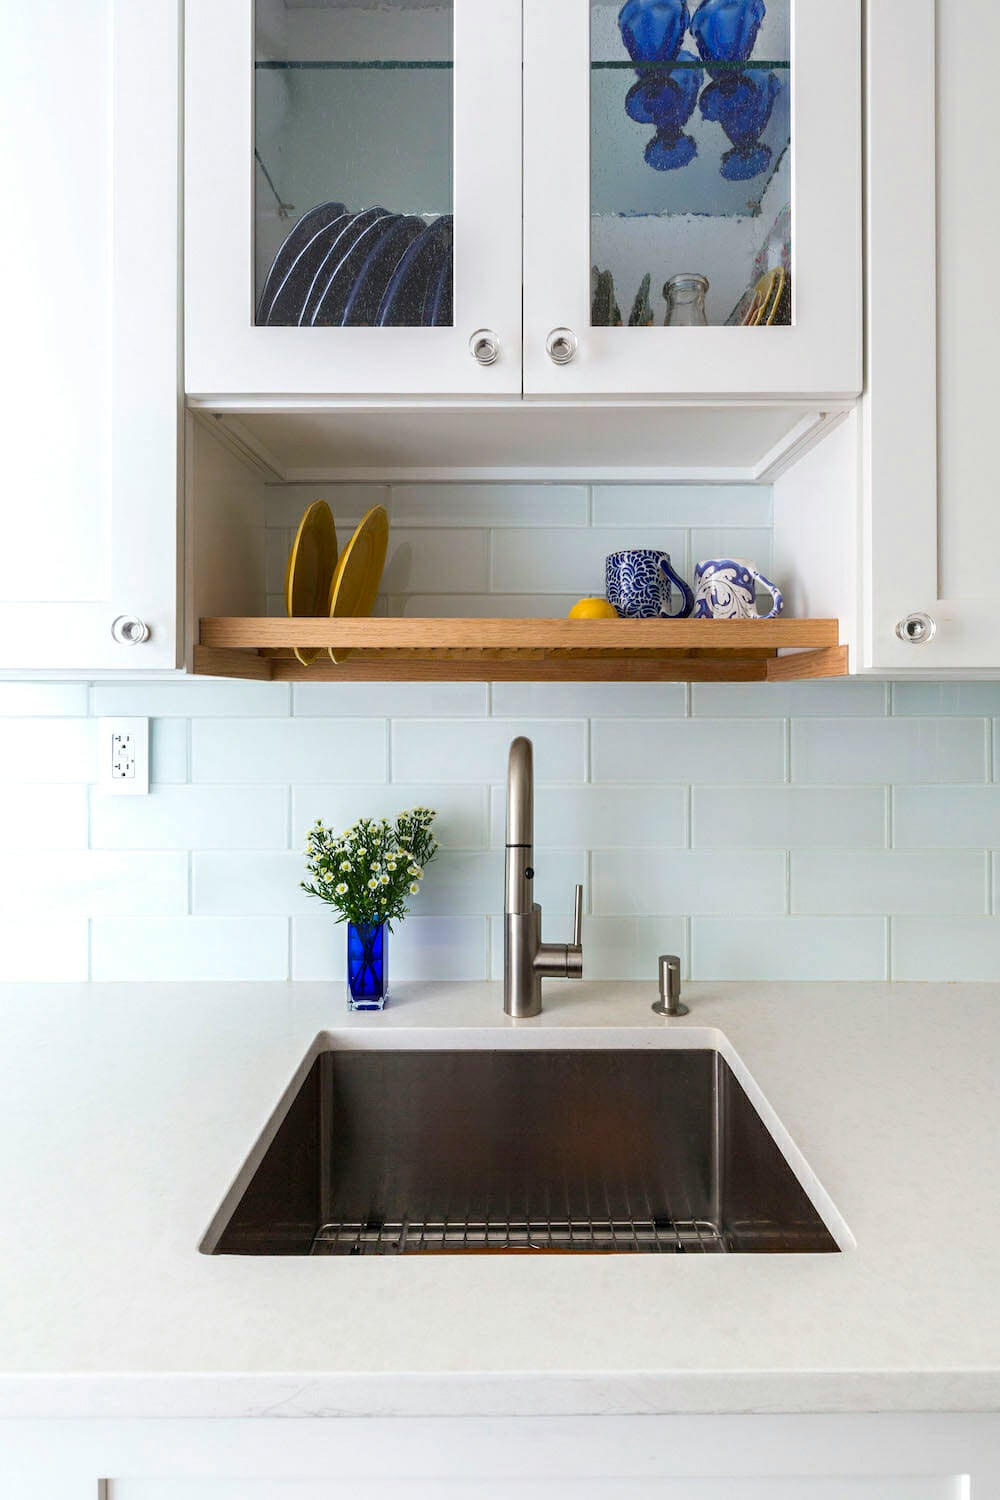 You’re Going to Want to Add This Mess-Free Dish Rack to Your Kitchen Remodel Plans